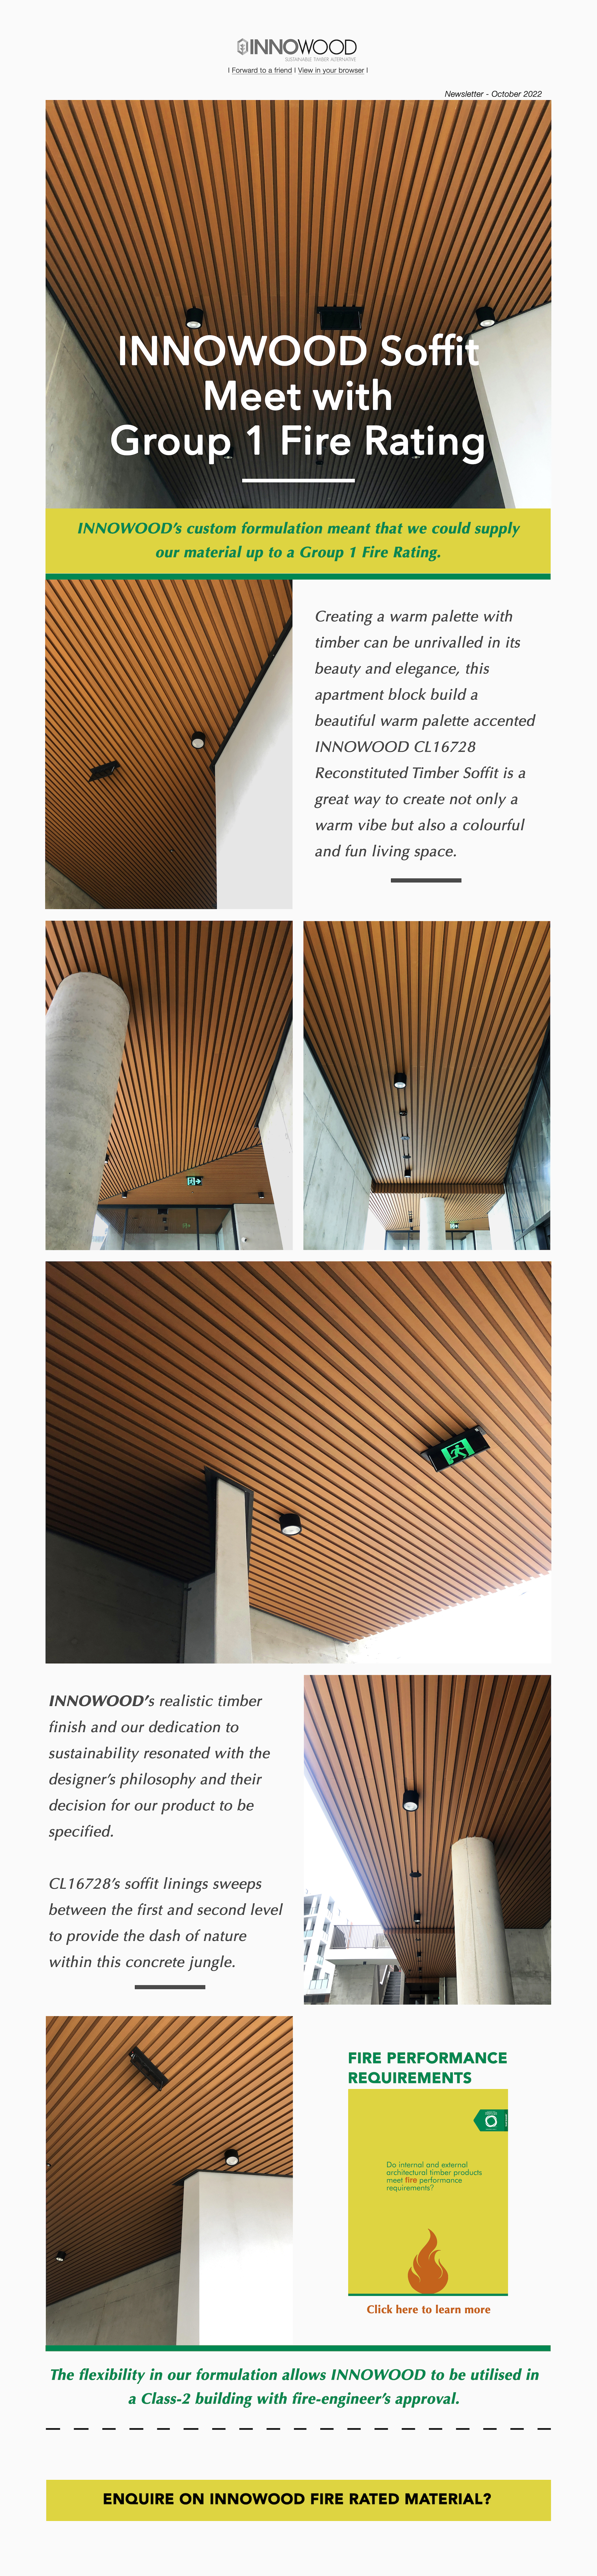 INNOWOOD Soffit meet with the Group 1 Fire Rating